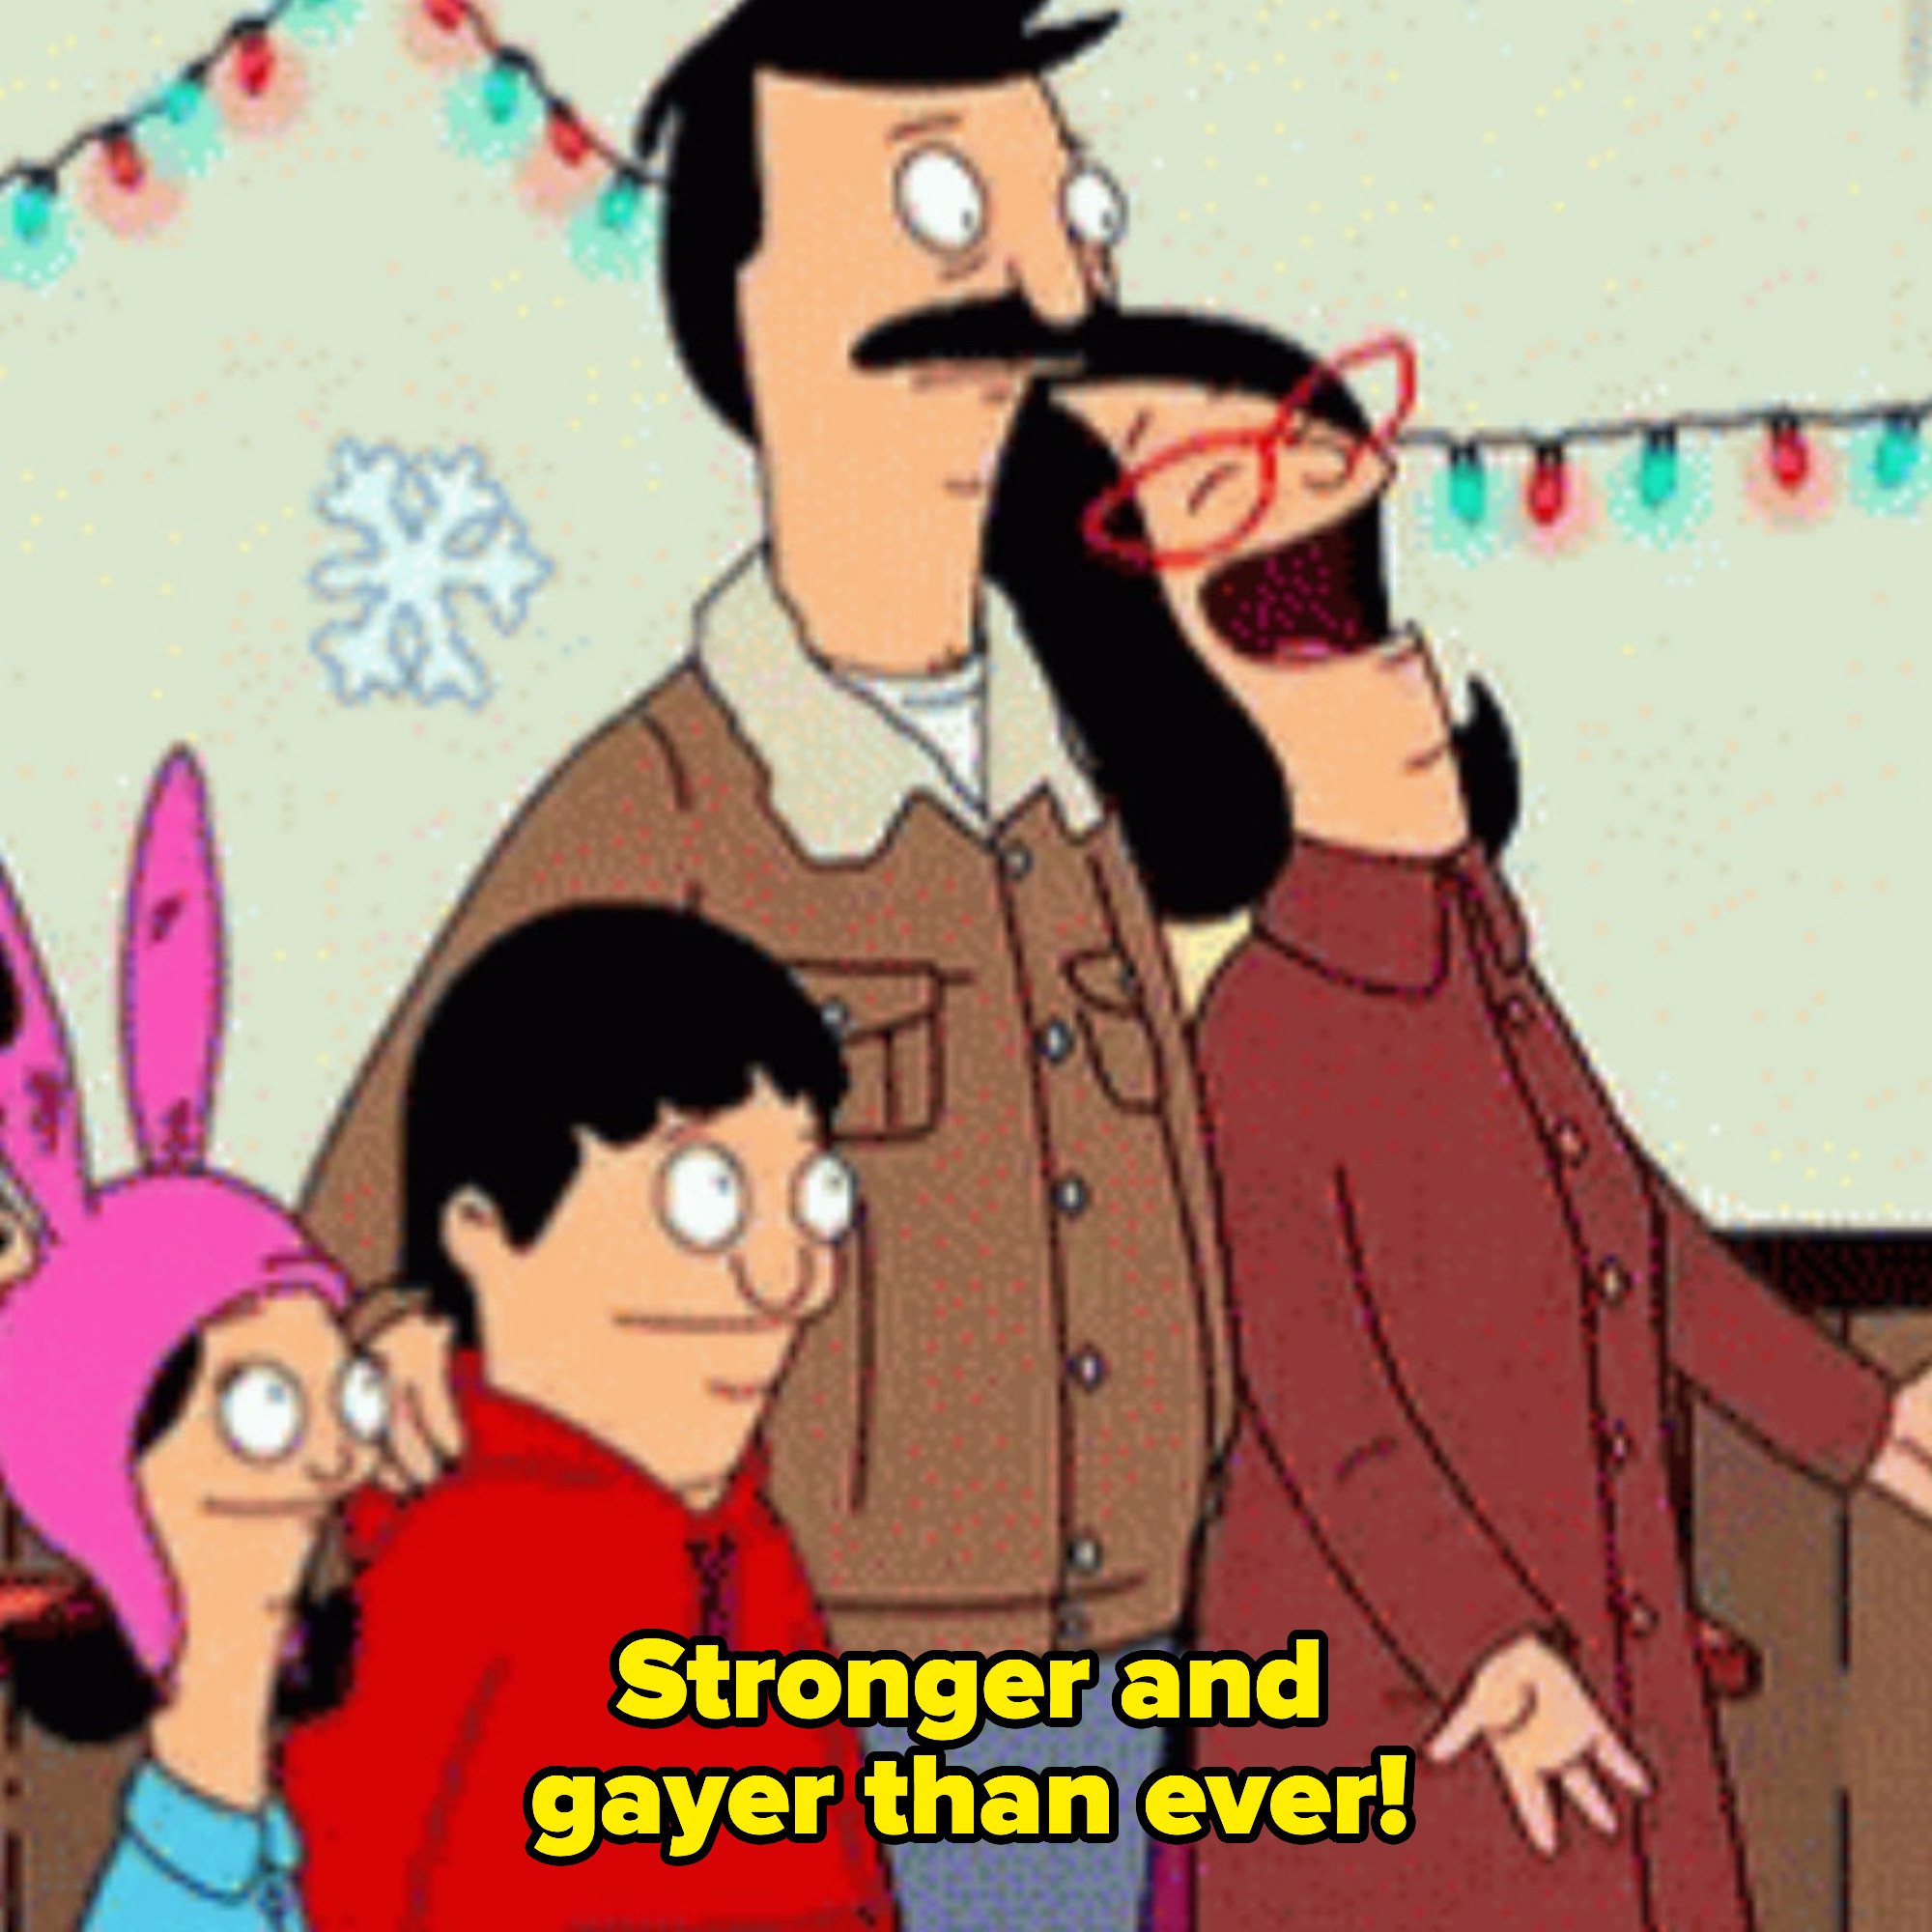 Linda from &quot;Bob&#x27;s Burgers:&quot; &quot;Stronger and gayer than ever!&quot;